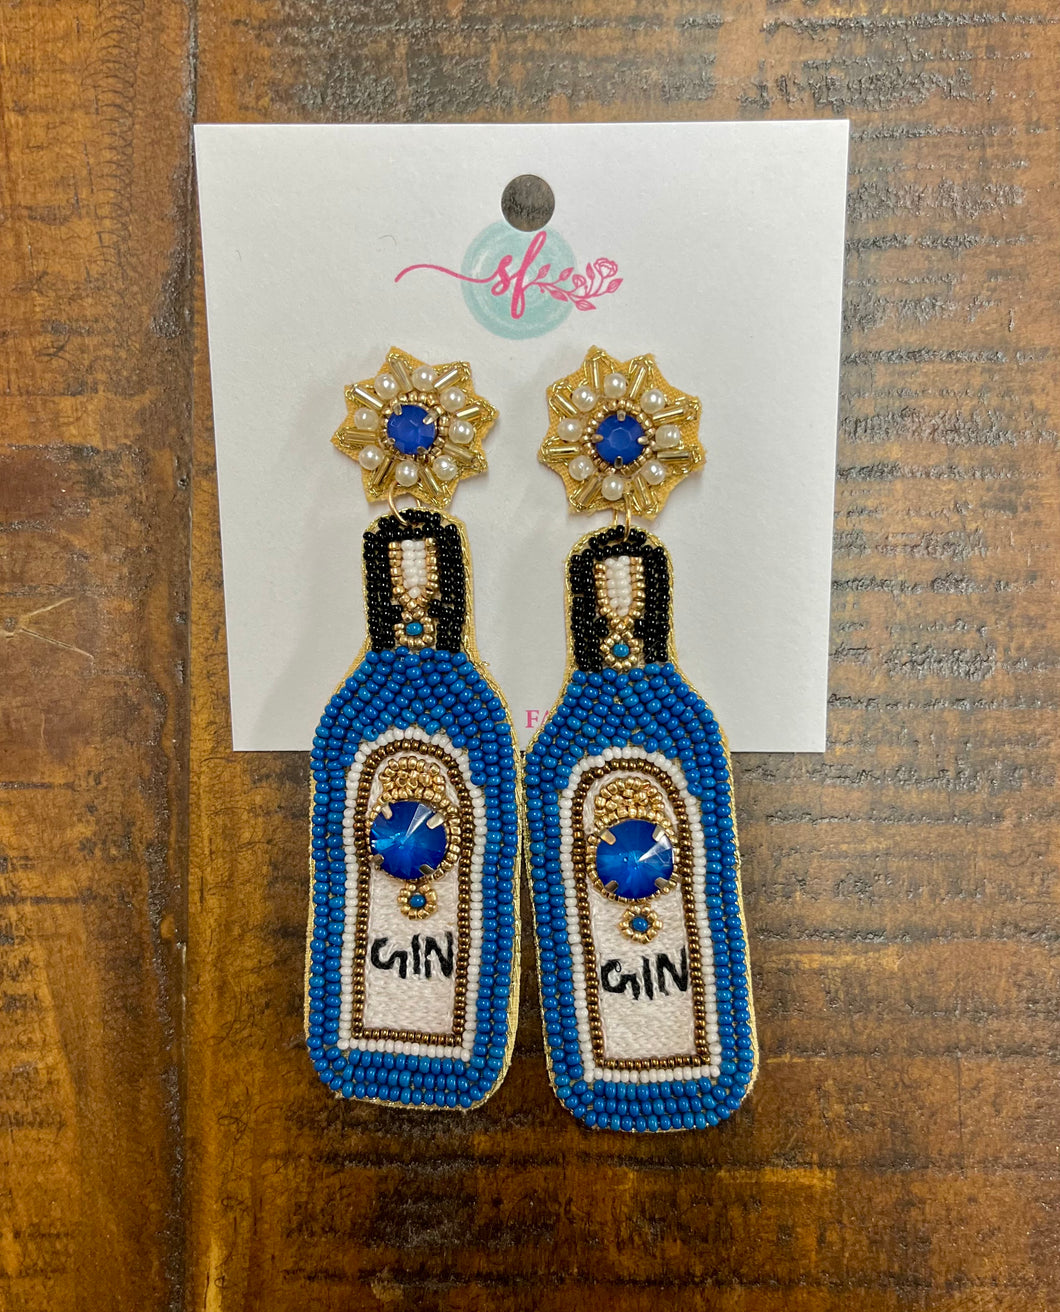 Gin Seed Bead Earrings - Southern Fashionista Boutique 